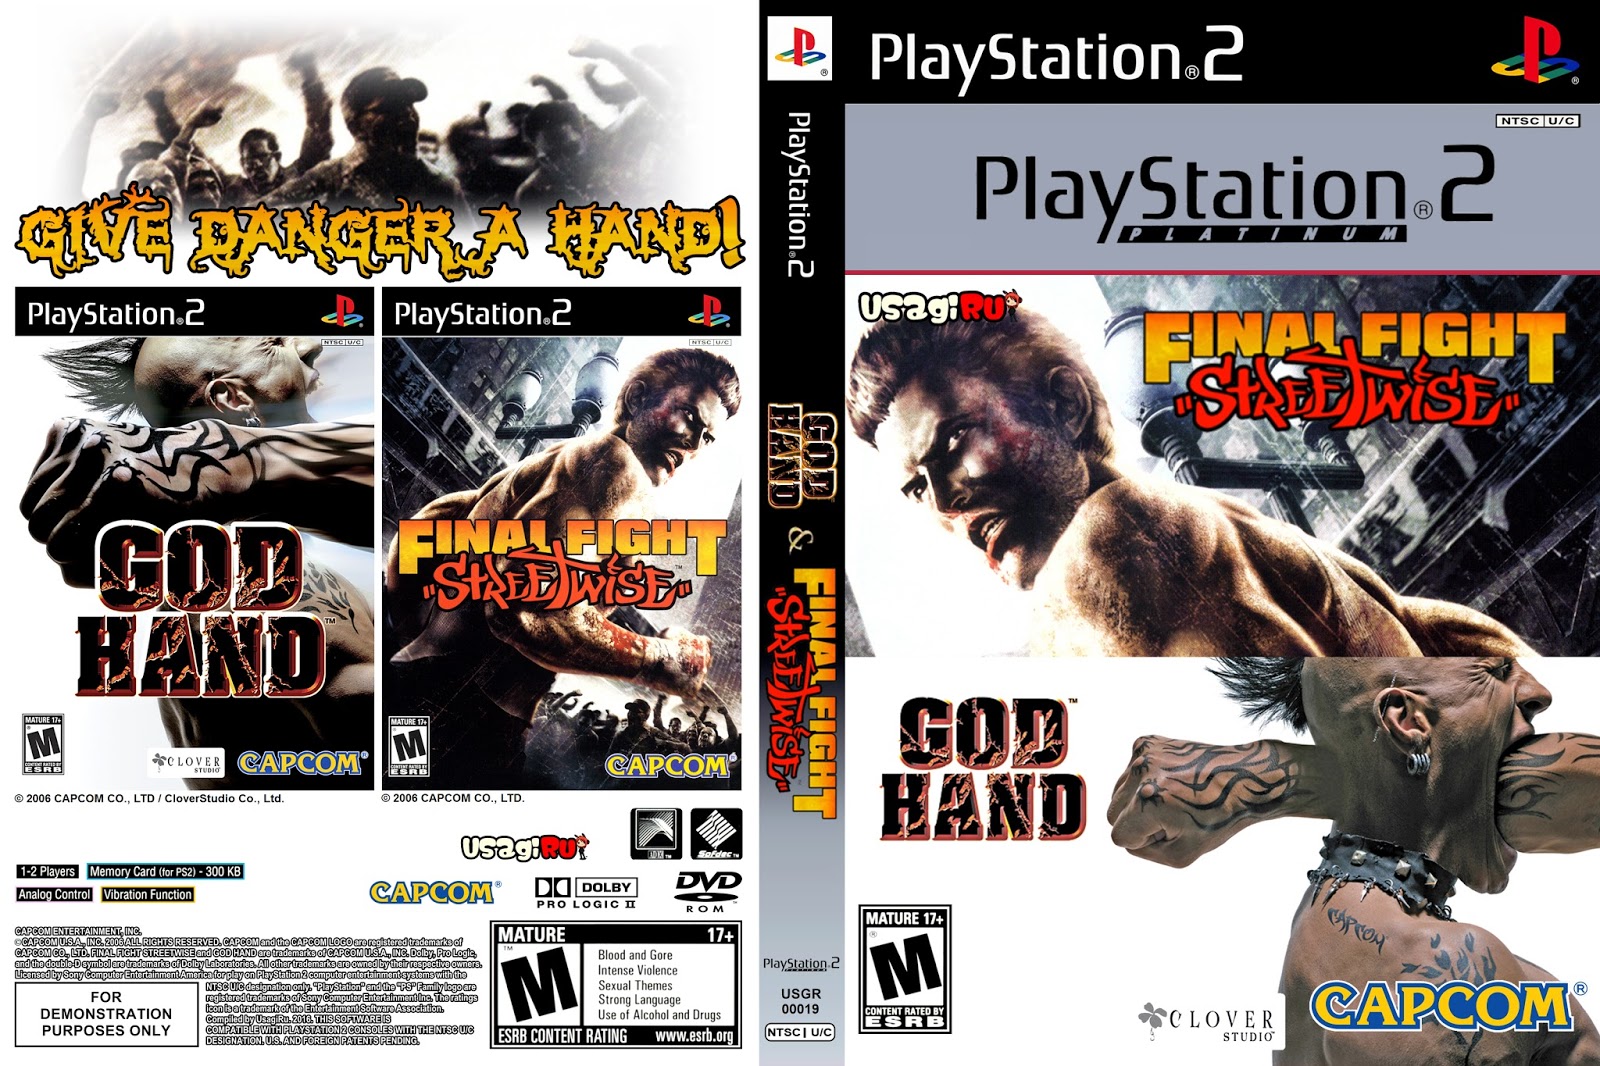 Игры на пс 2 на флешку. God hand ps2. God hand PLAYSTATION 2. Final Fight Streetwise ps2. Final Fight ps2.